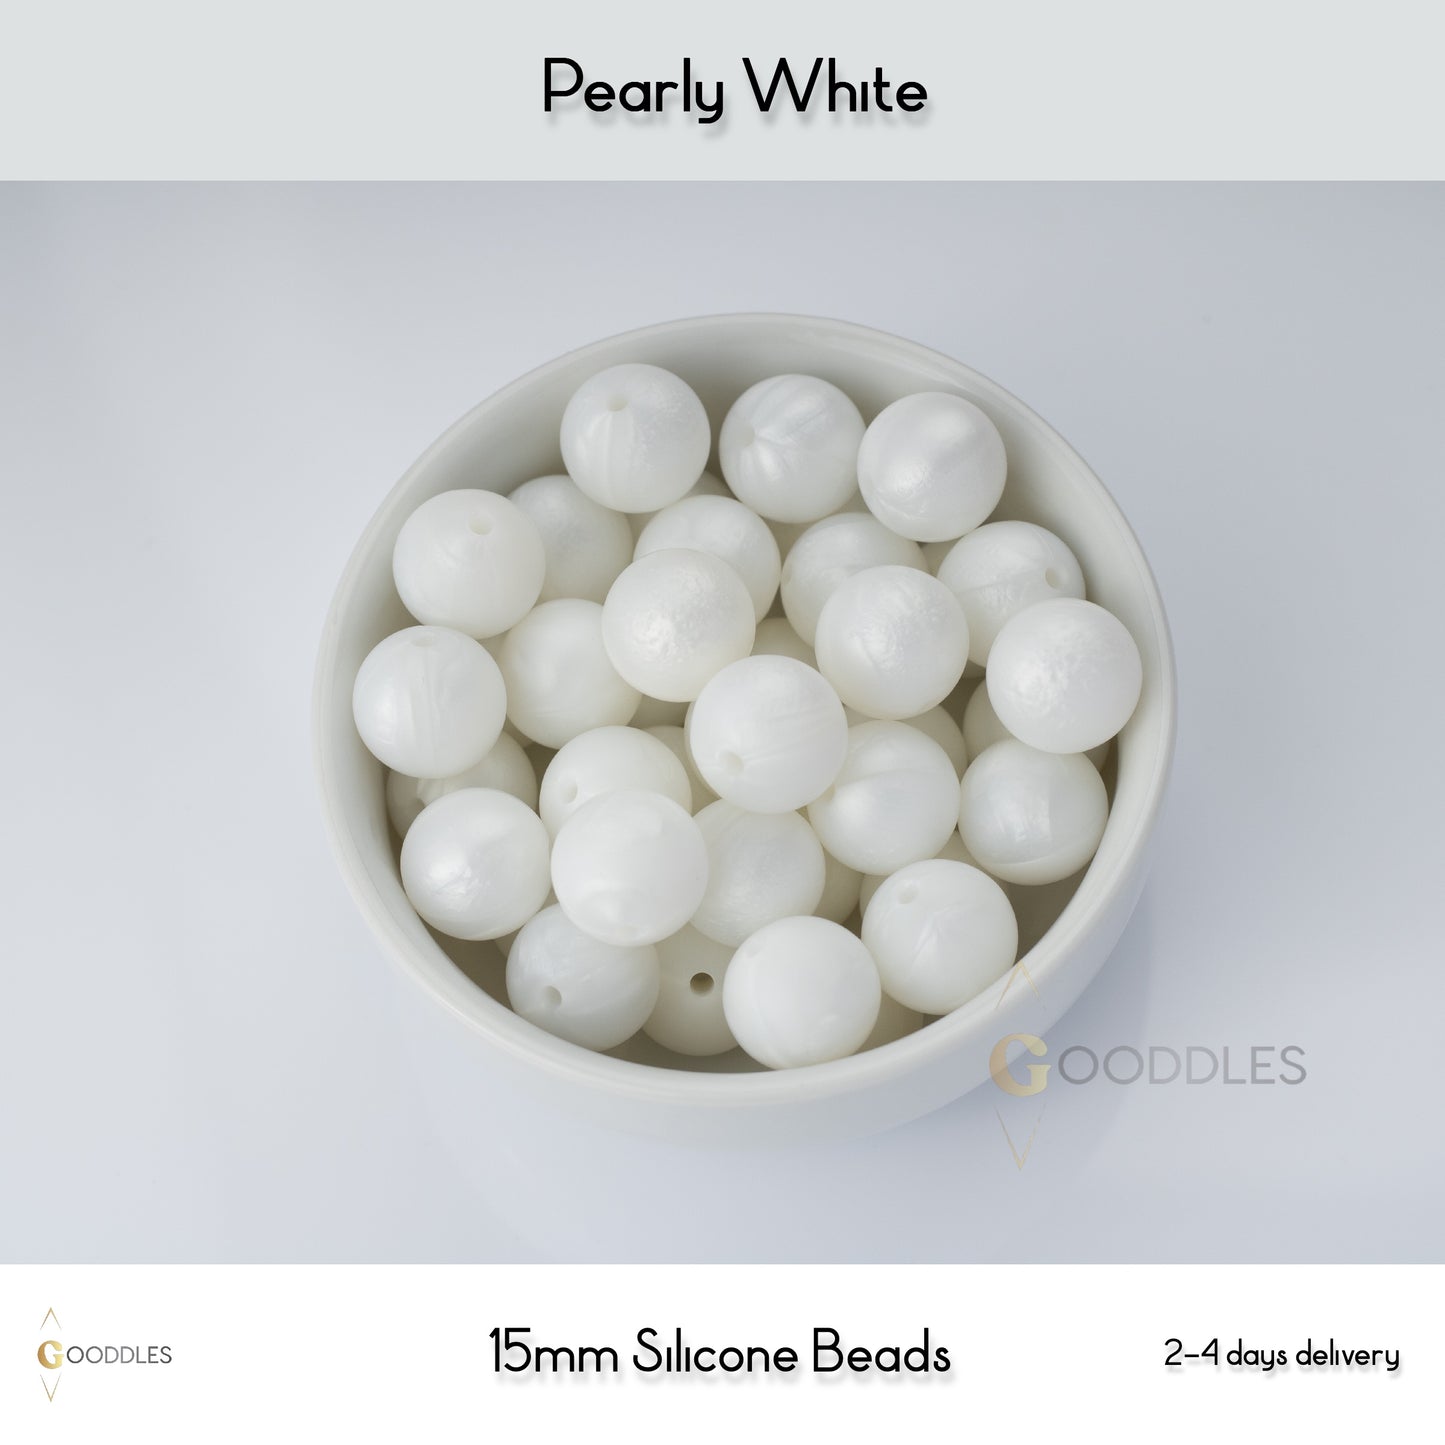 5pcs, Pearly White Silicone Beads Round Silicone Beads